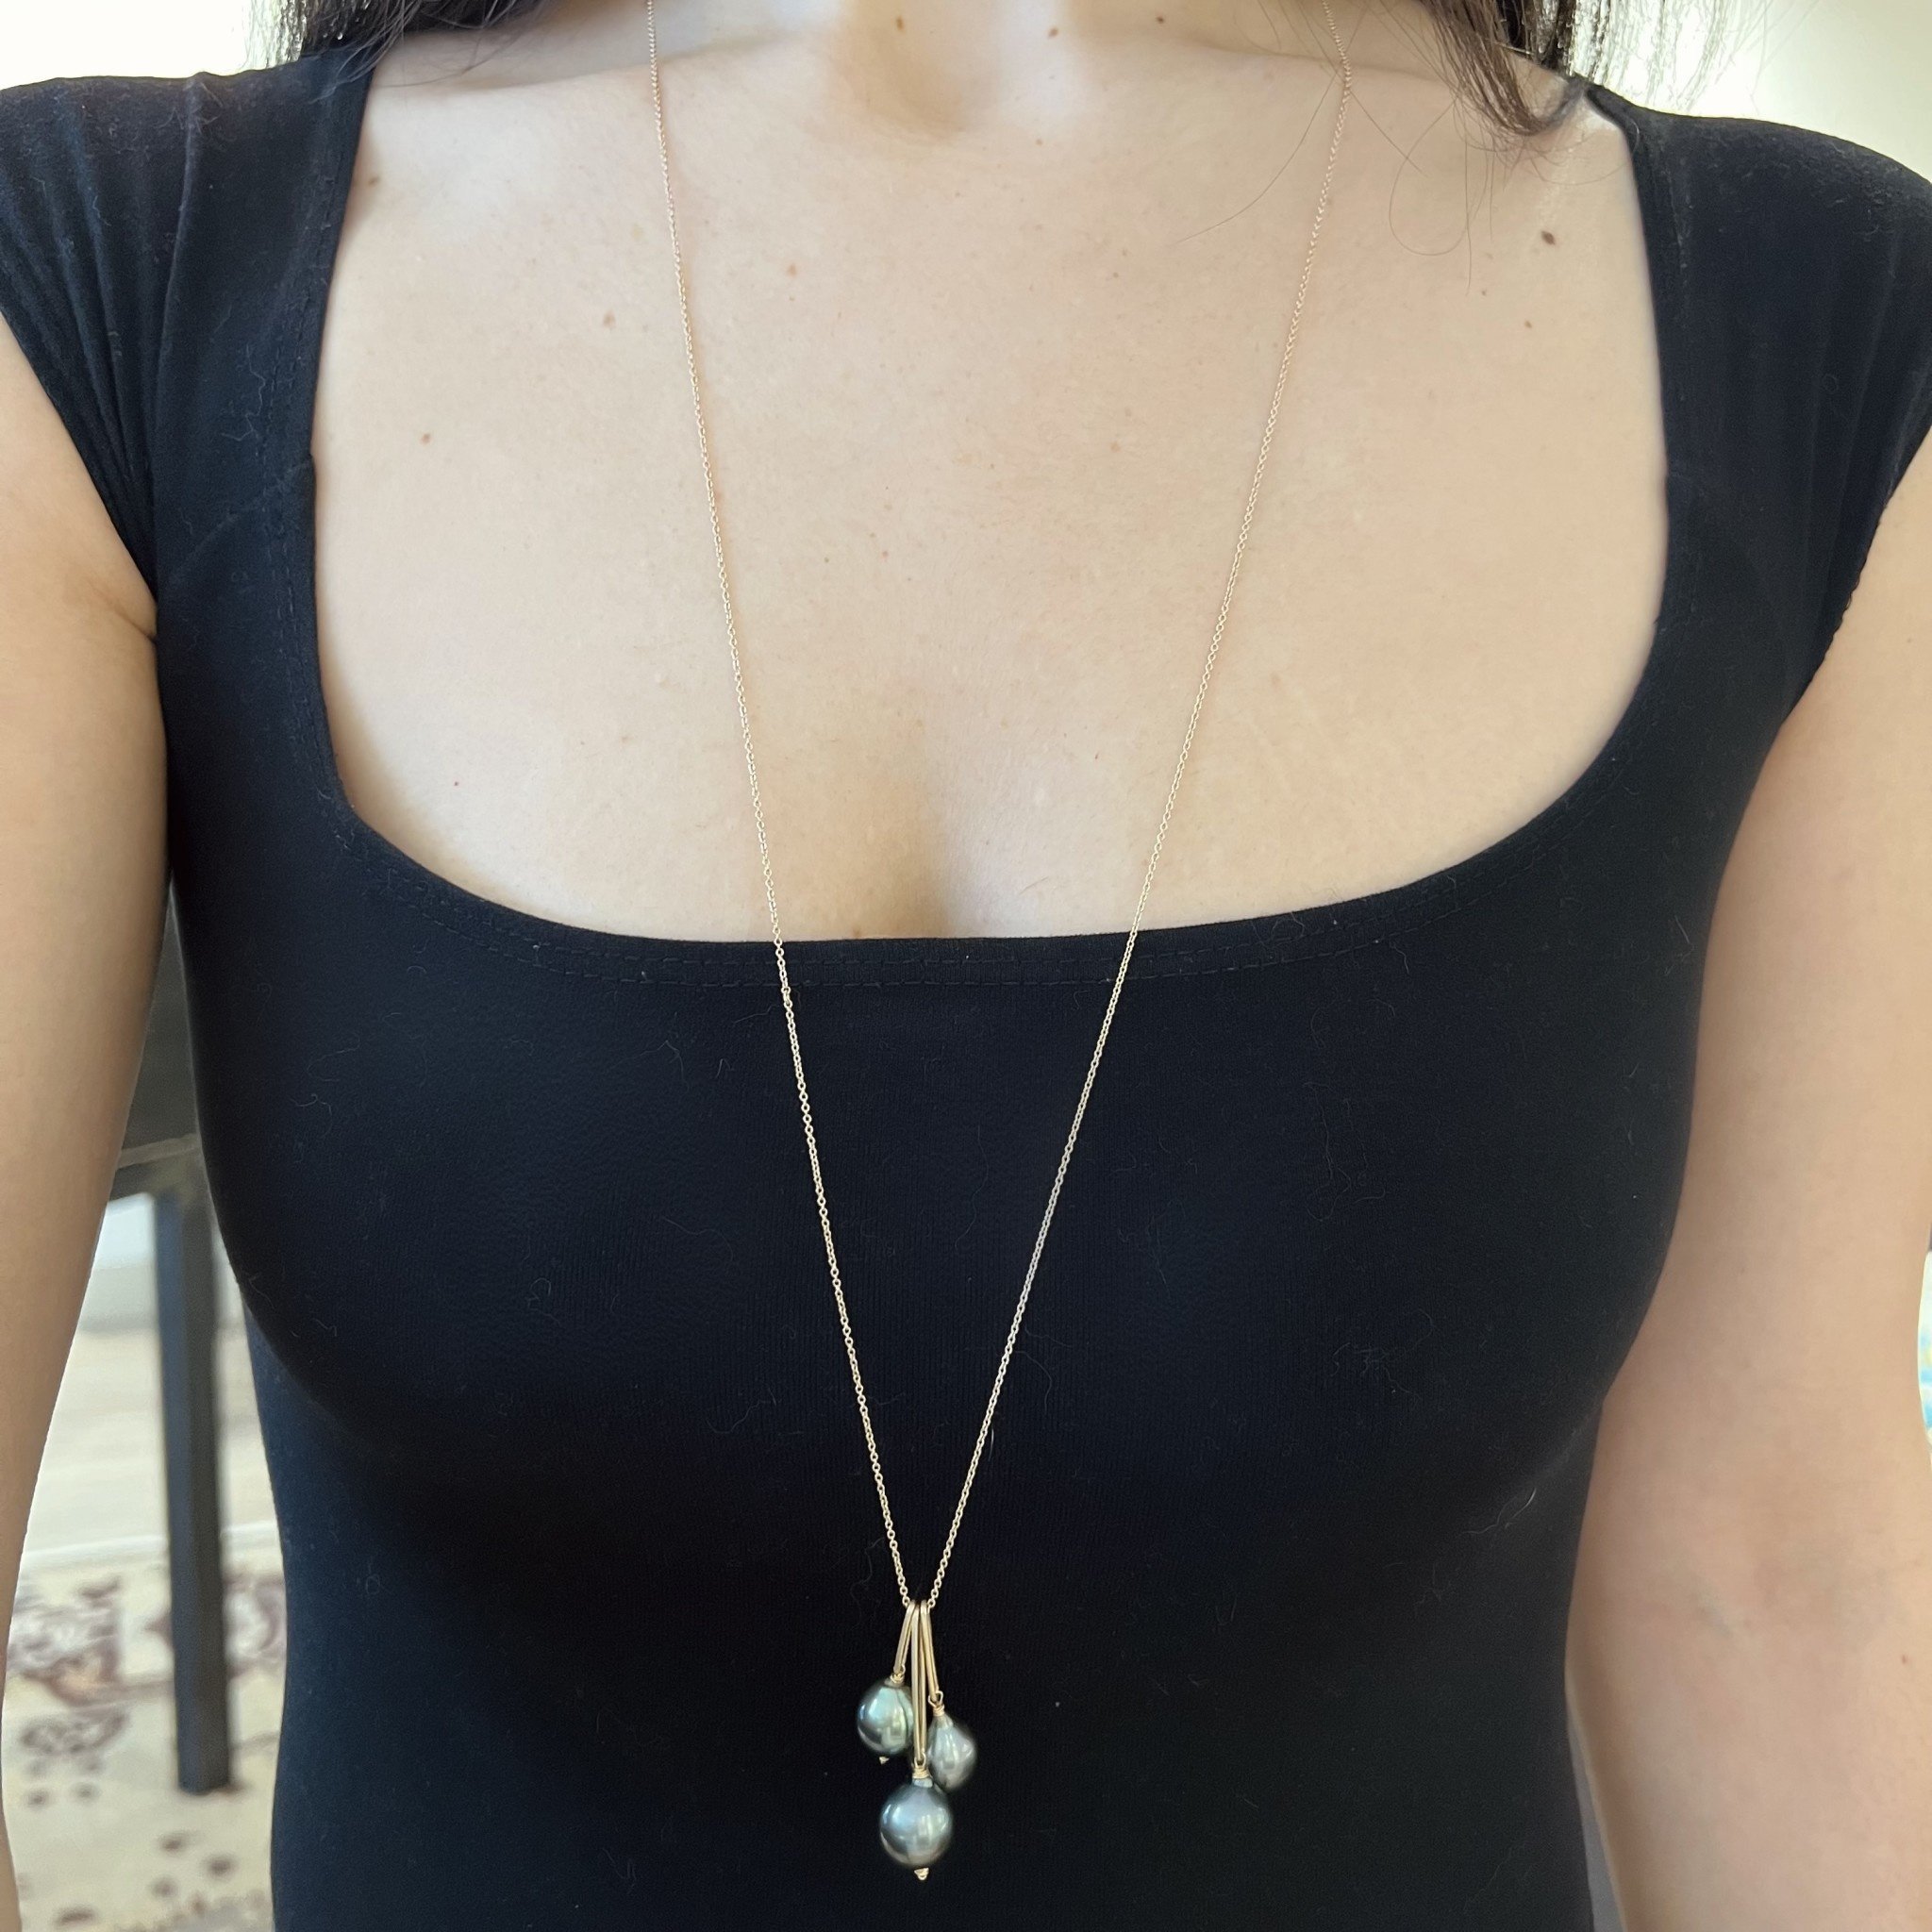 Long chain necklace